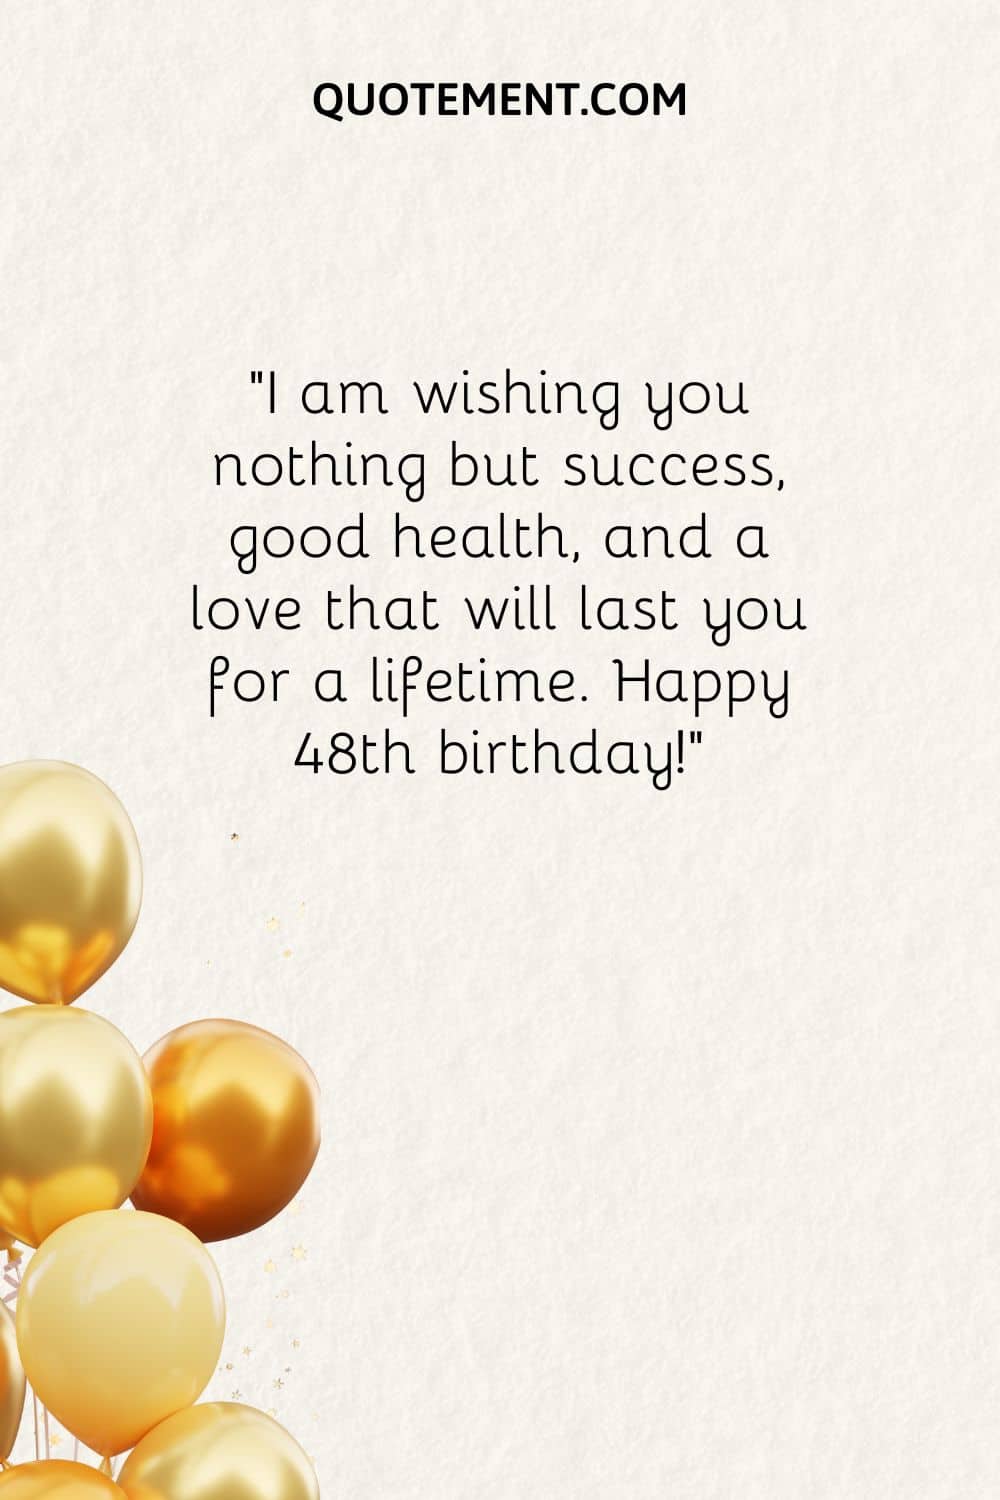 I am wishing you nothing but success, good health, and a love that will last you for a lifetime